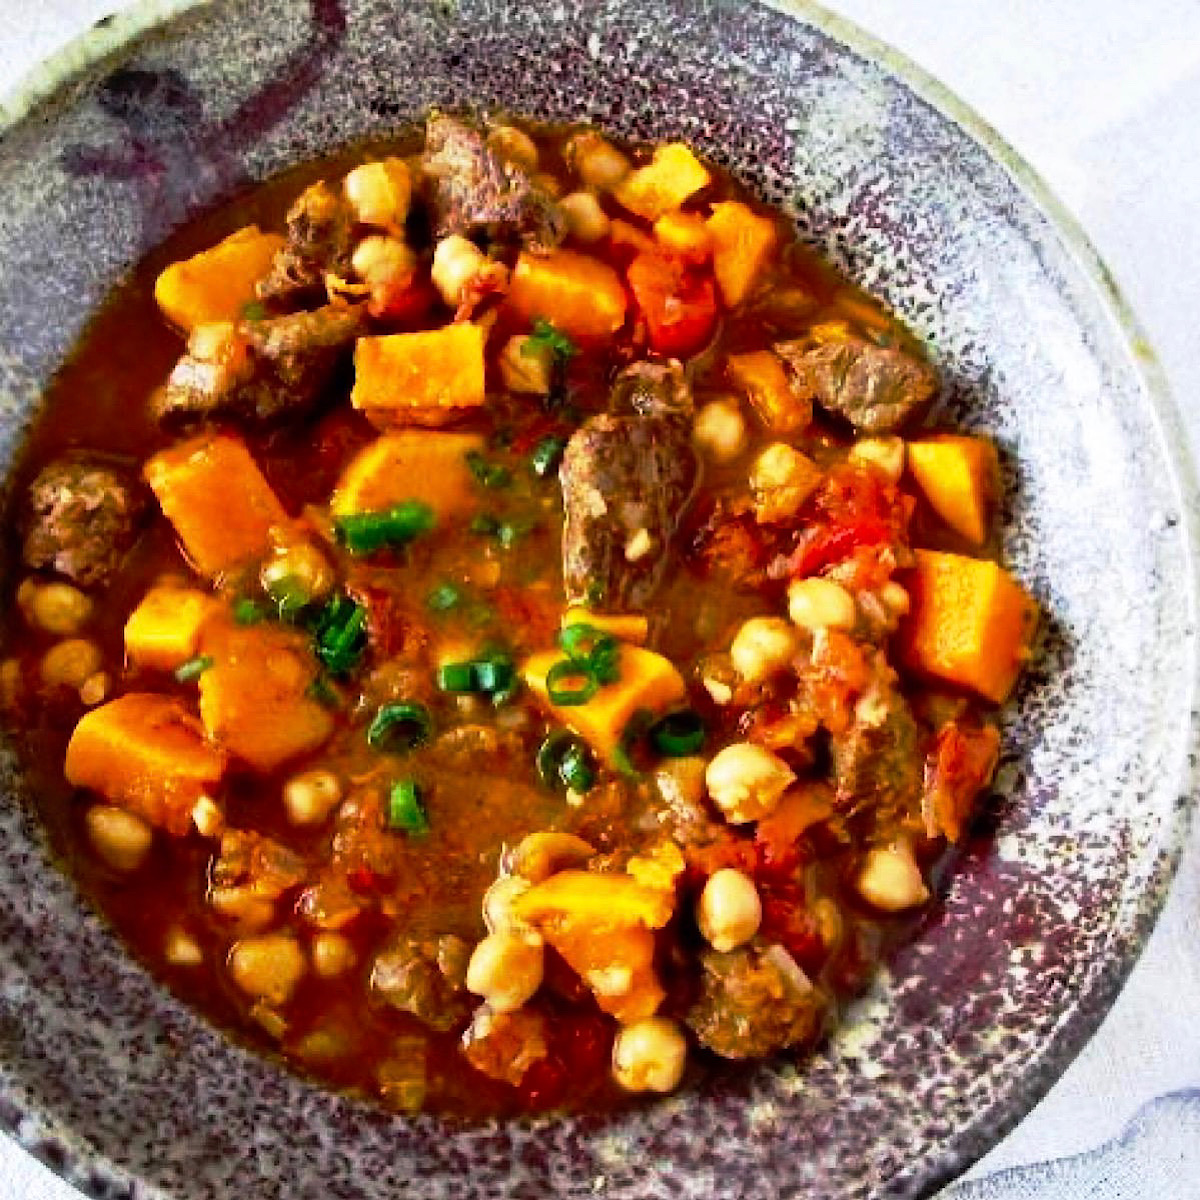 Moroccan beef and sweet potato stew